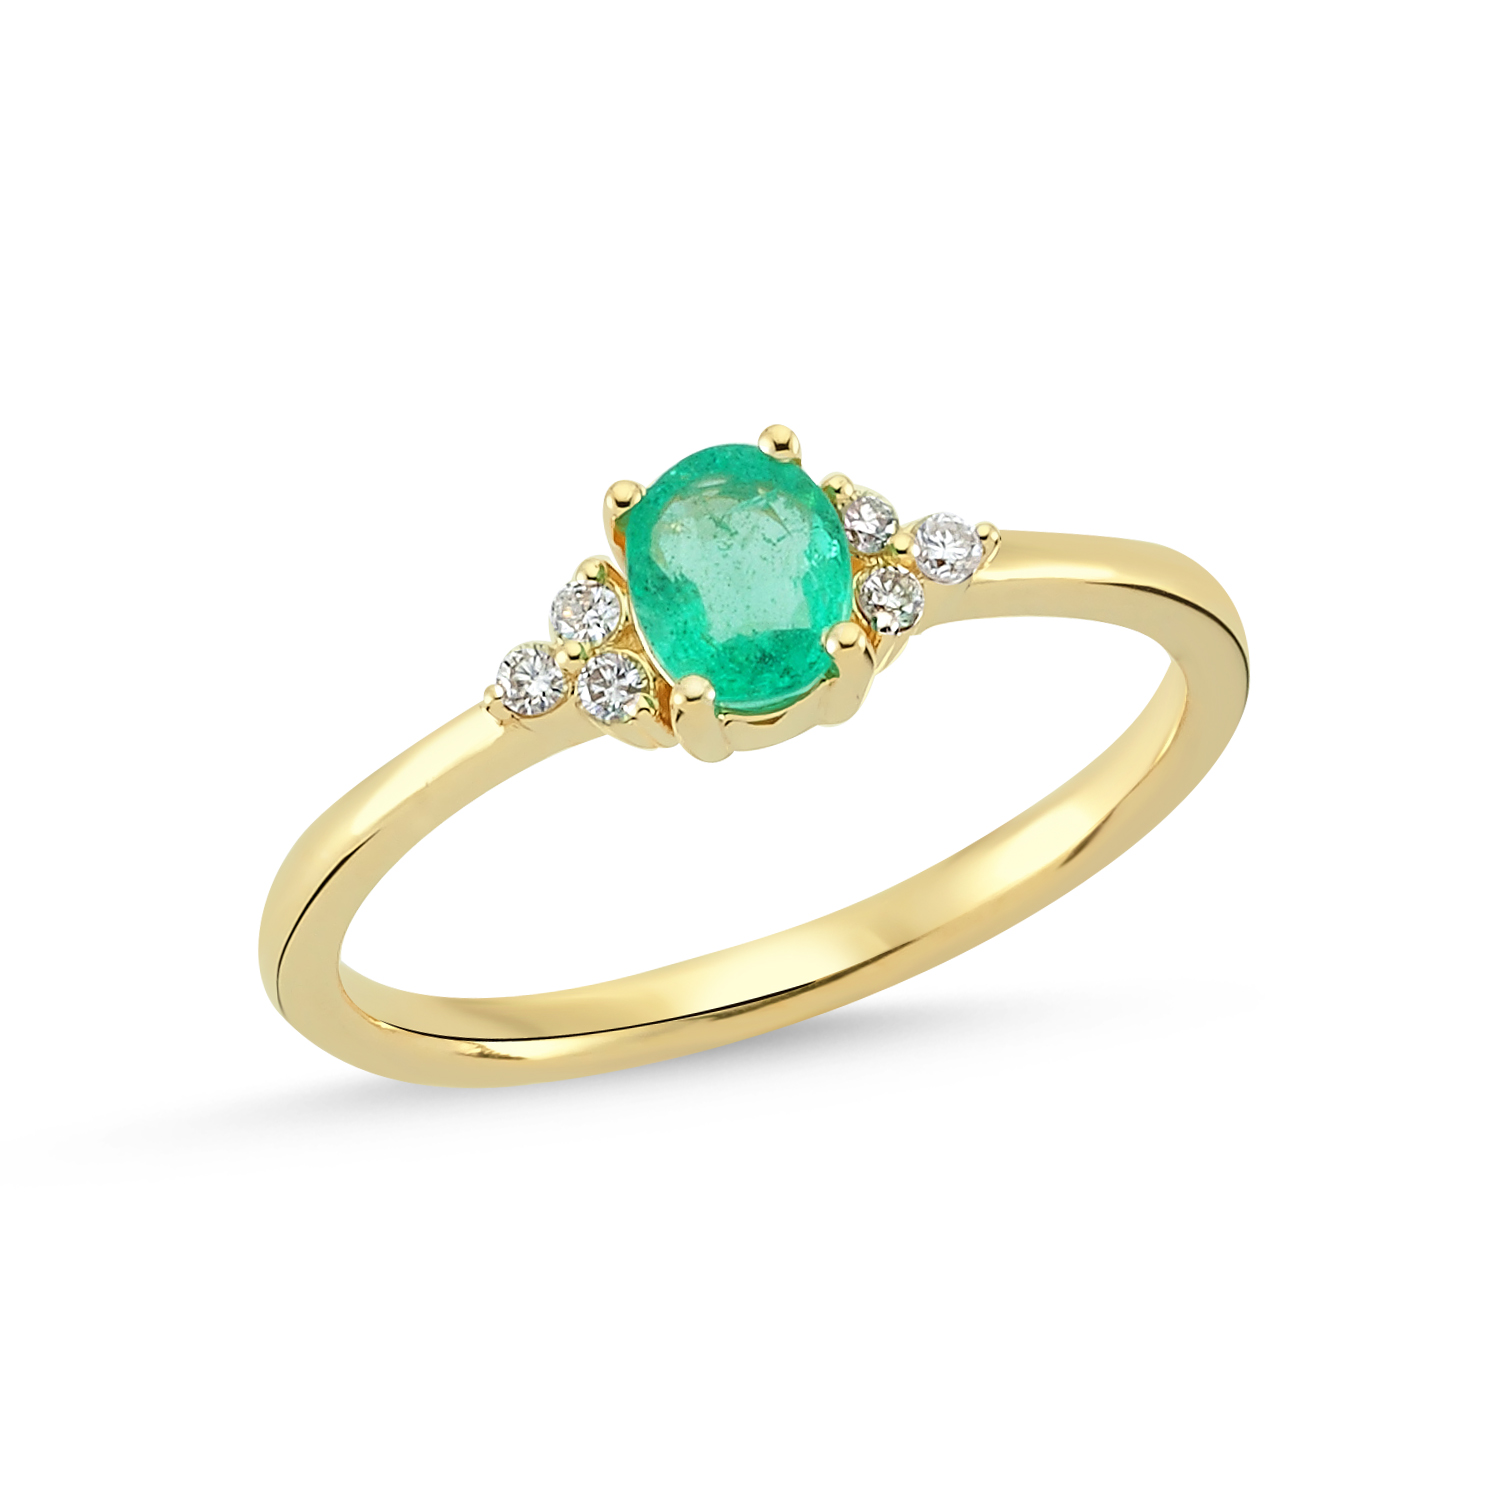 Oval Cut Emerald and Diamond Ring